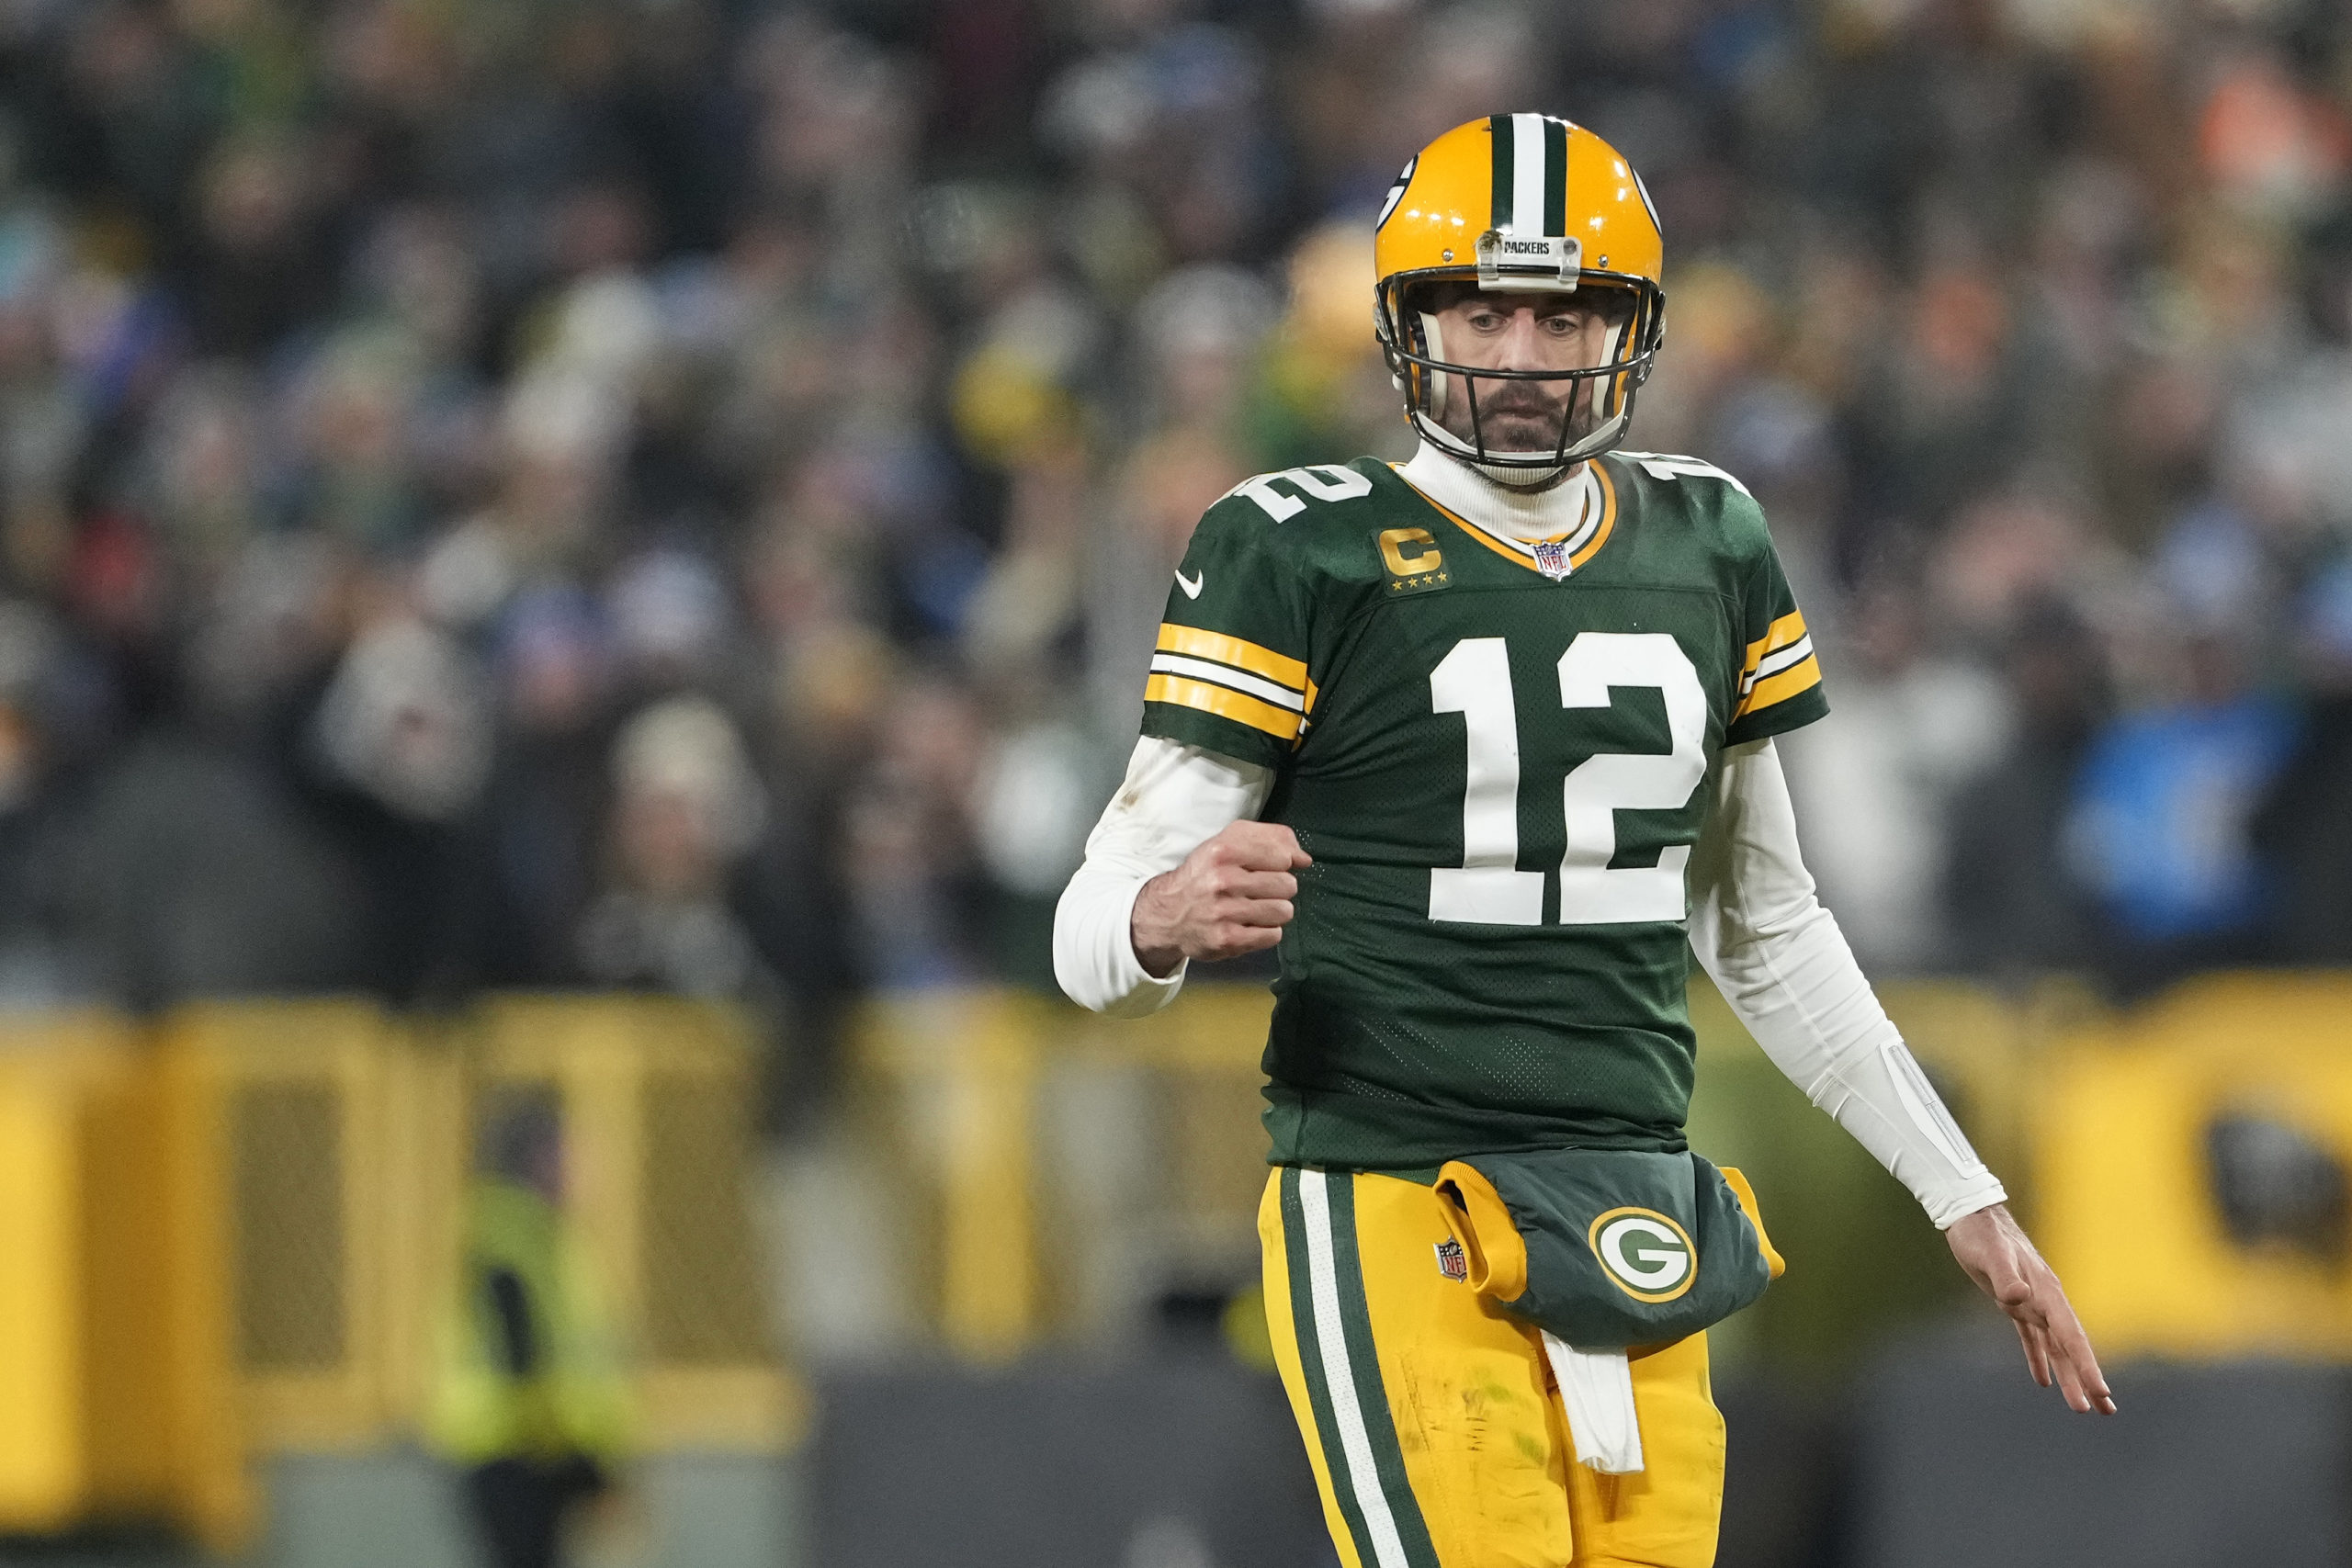 GREEN BAY, WISCONSIN - JANUARY 08: Aaron Rodgers #12 of the Green Bay Packers celebrates against the Detroit Lions in the second half at Lambeau Field on January 08, 2023 in Green Bay, Wisconsin. (Photo by Patrick McDermott/Getty Images)